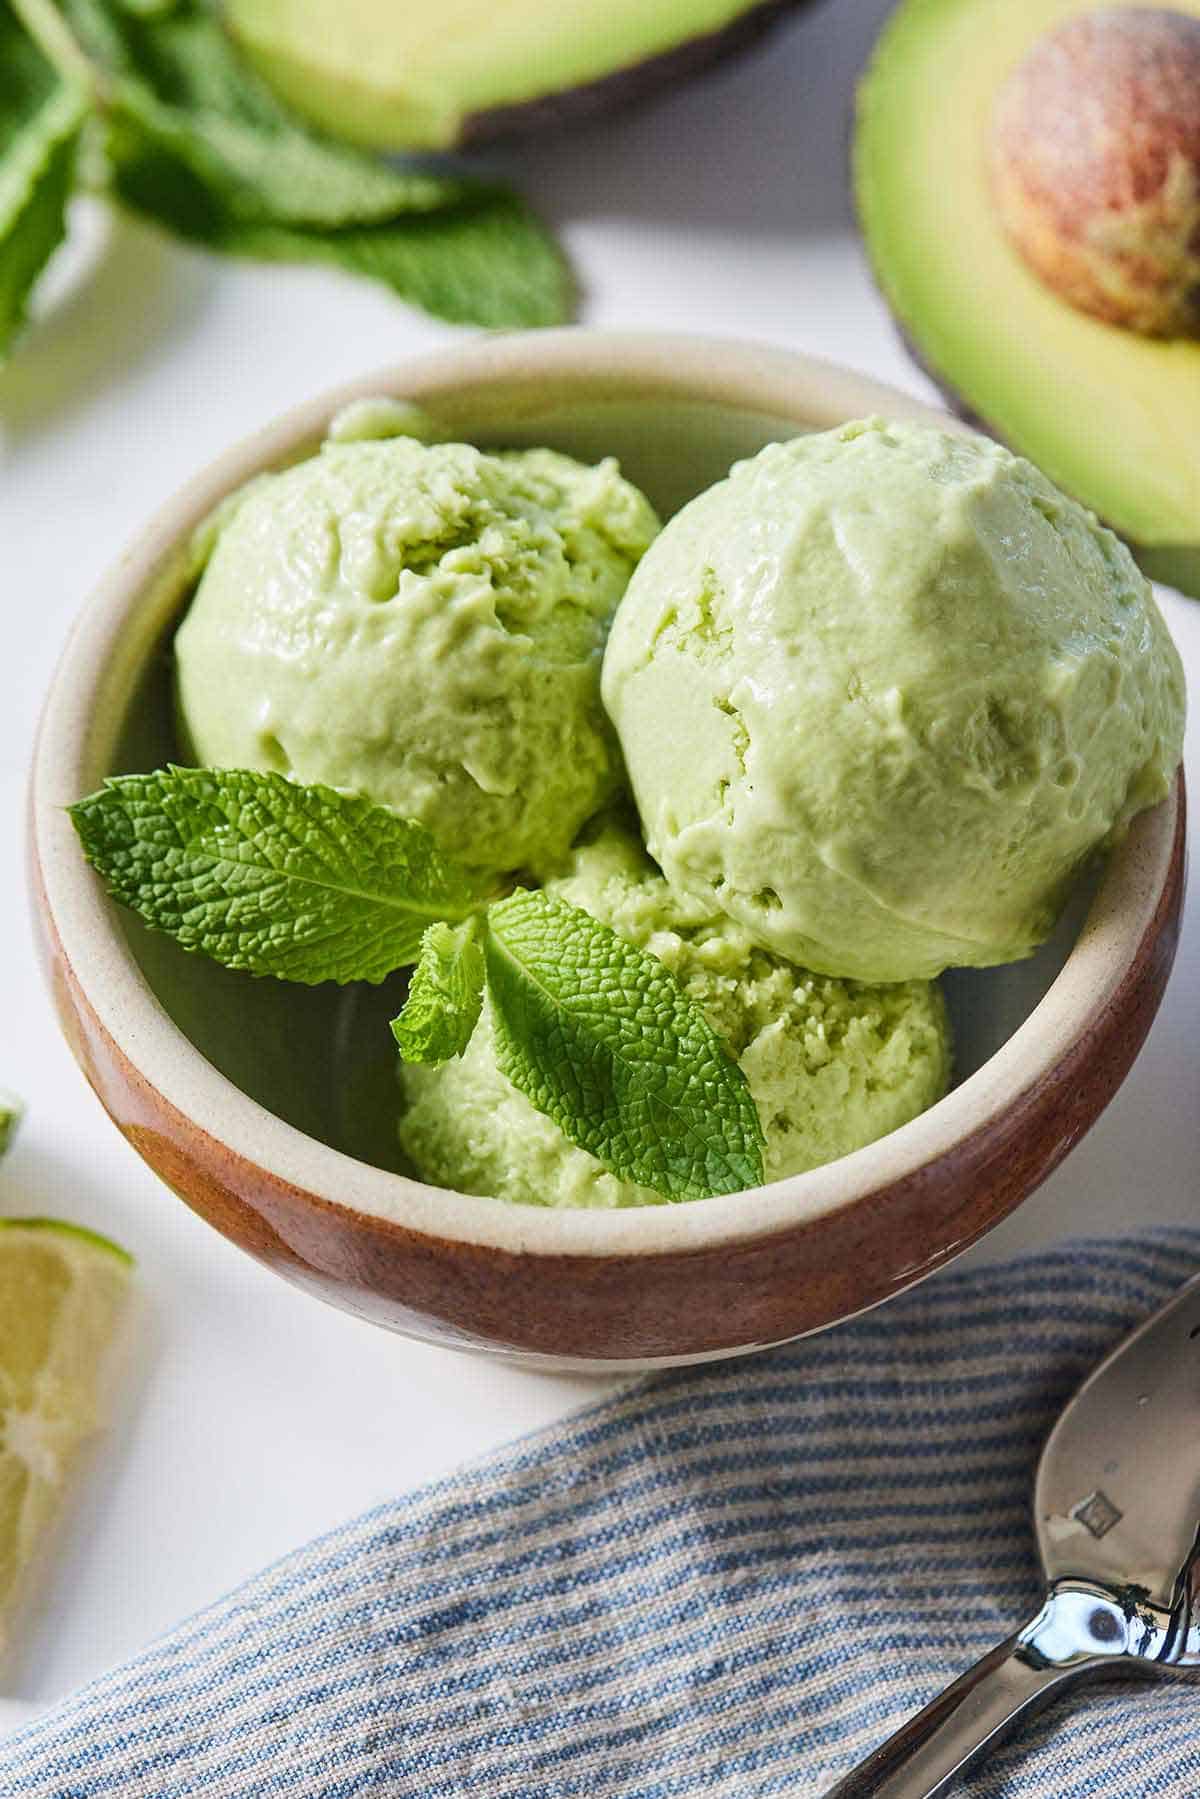 A bowl of avocado ice cream with fresh mint surrounded by cut avocado, lime wedges, and a linen napkin.